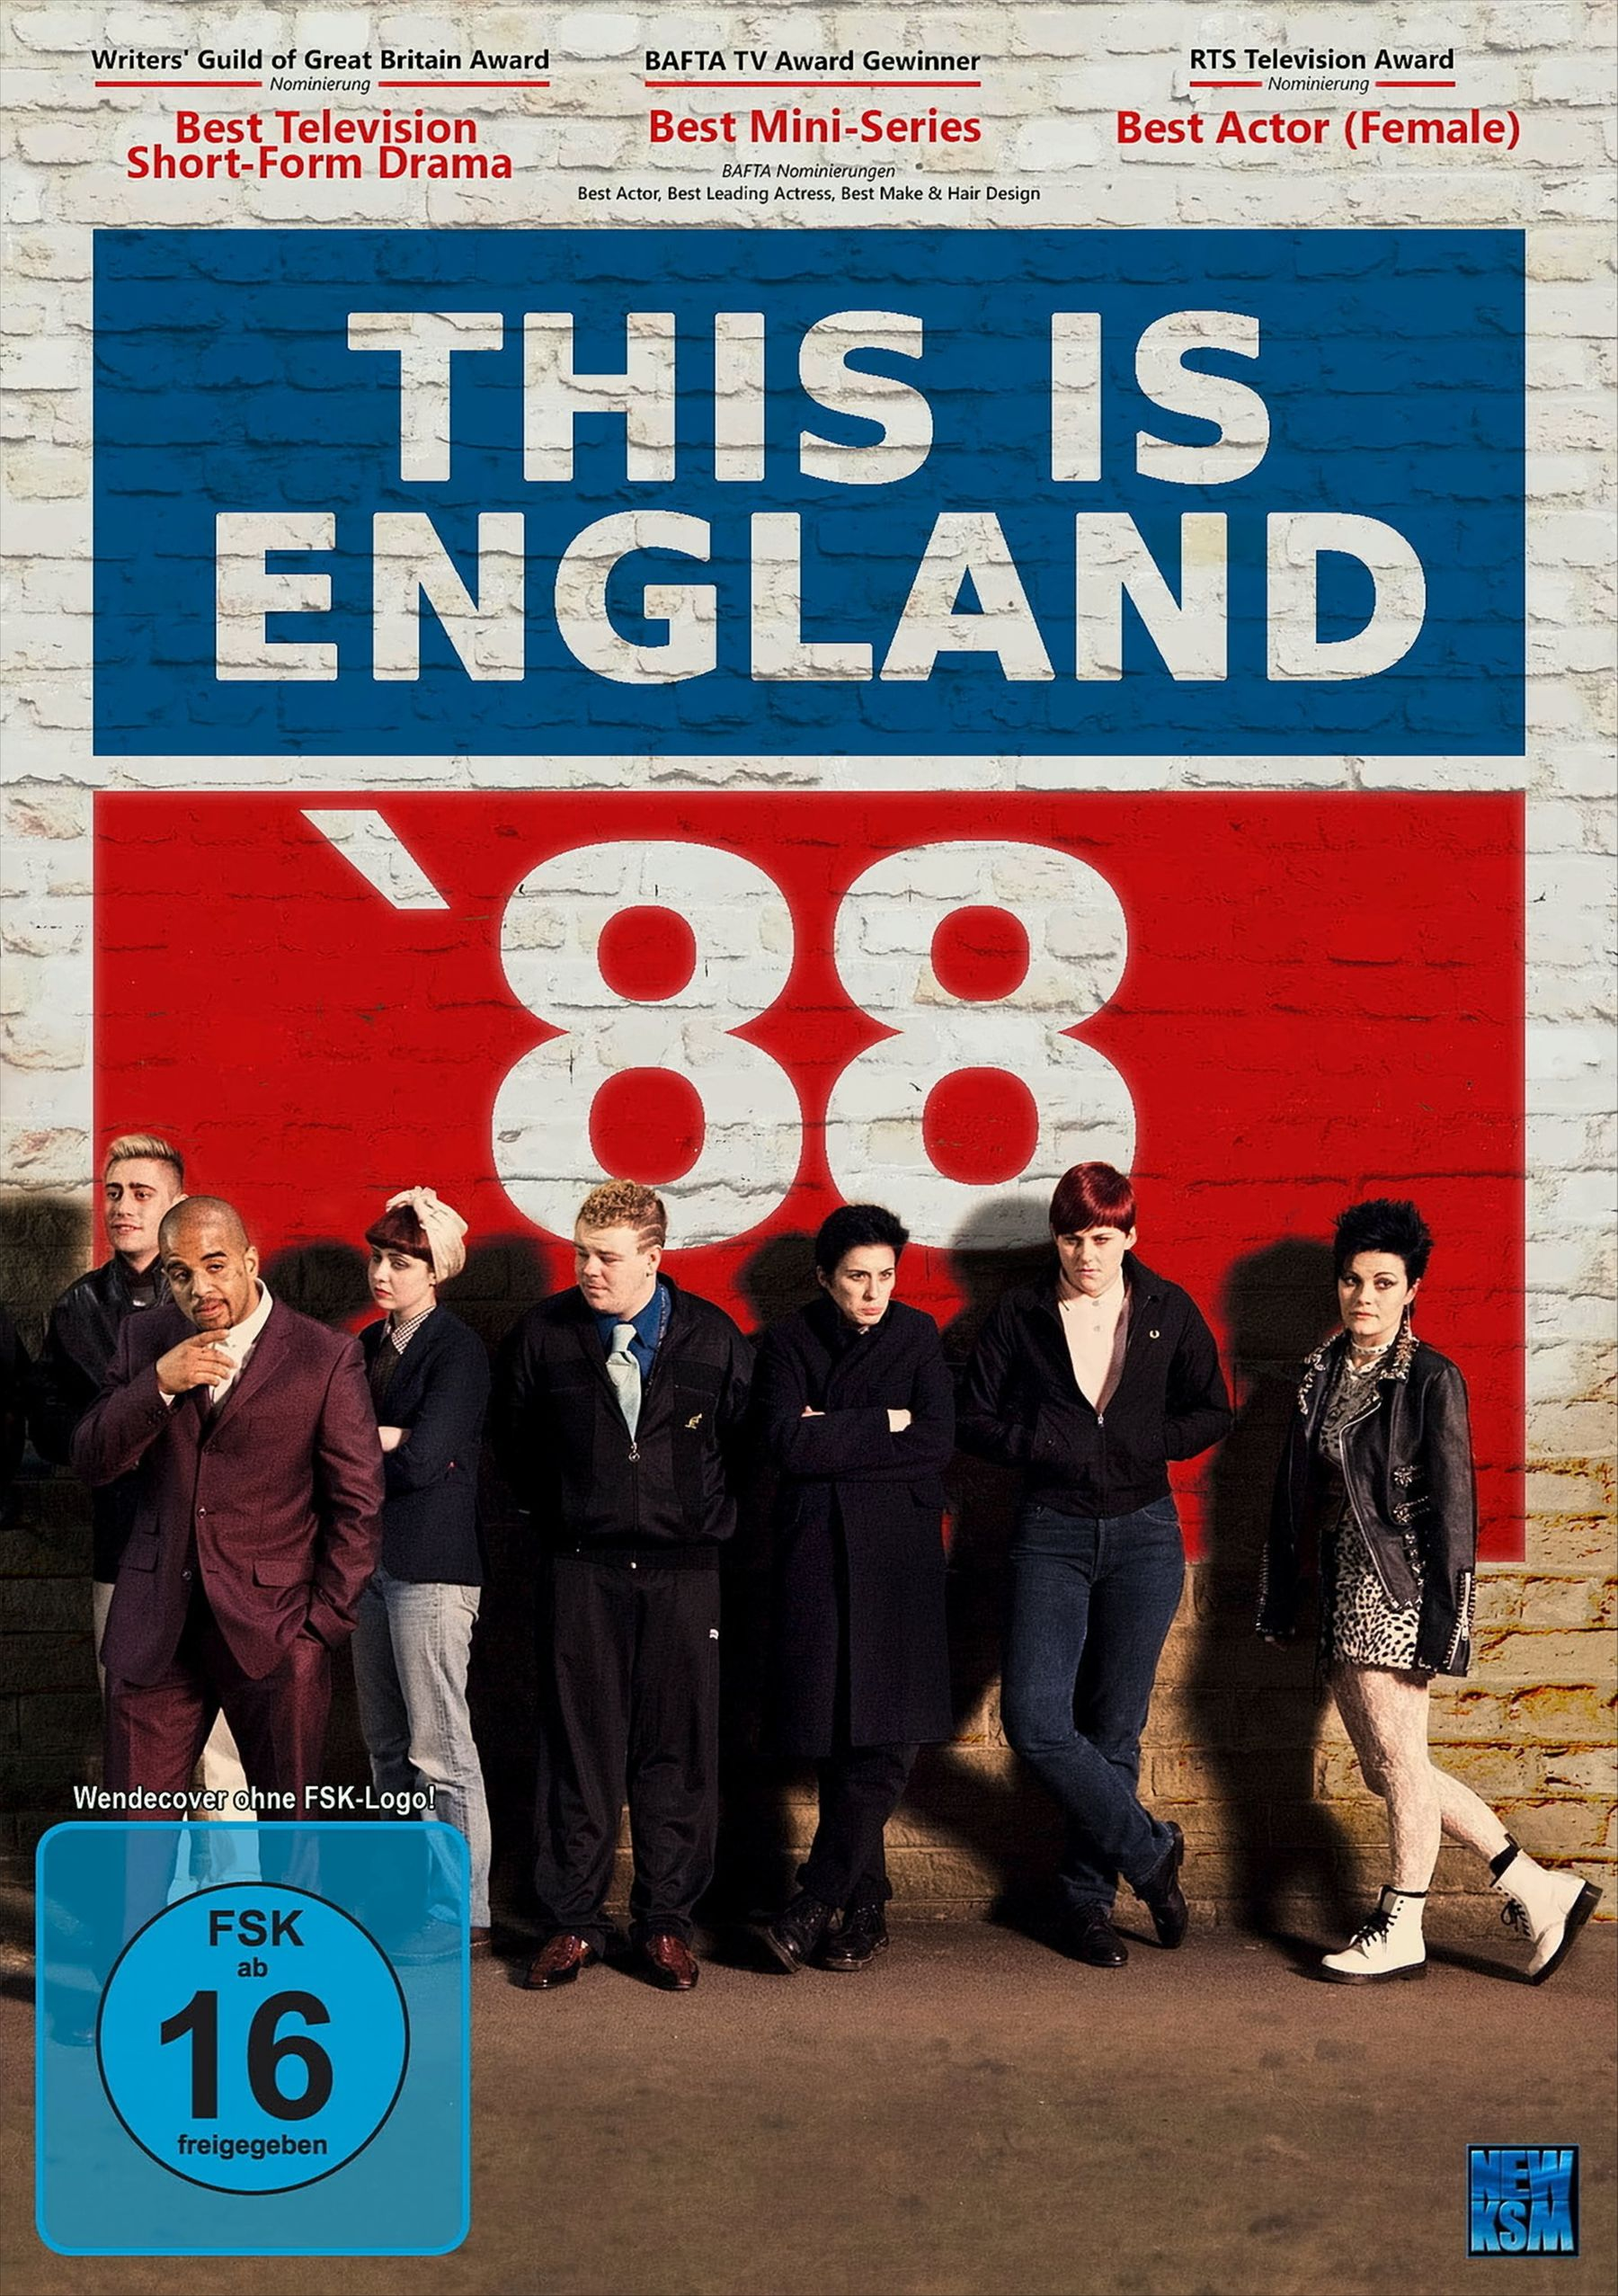 This Is England DVD \'88